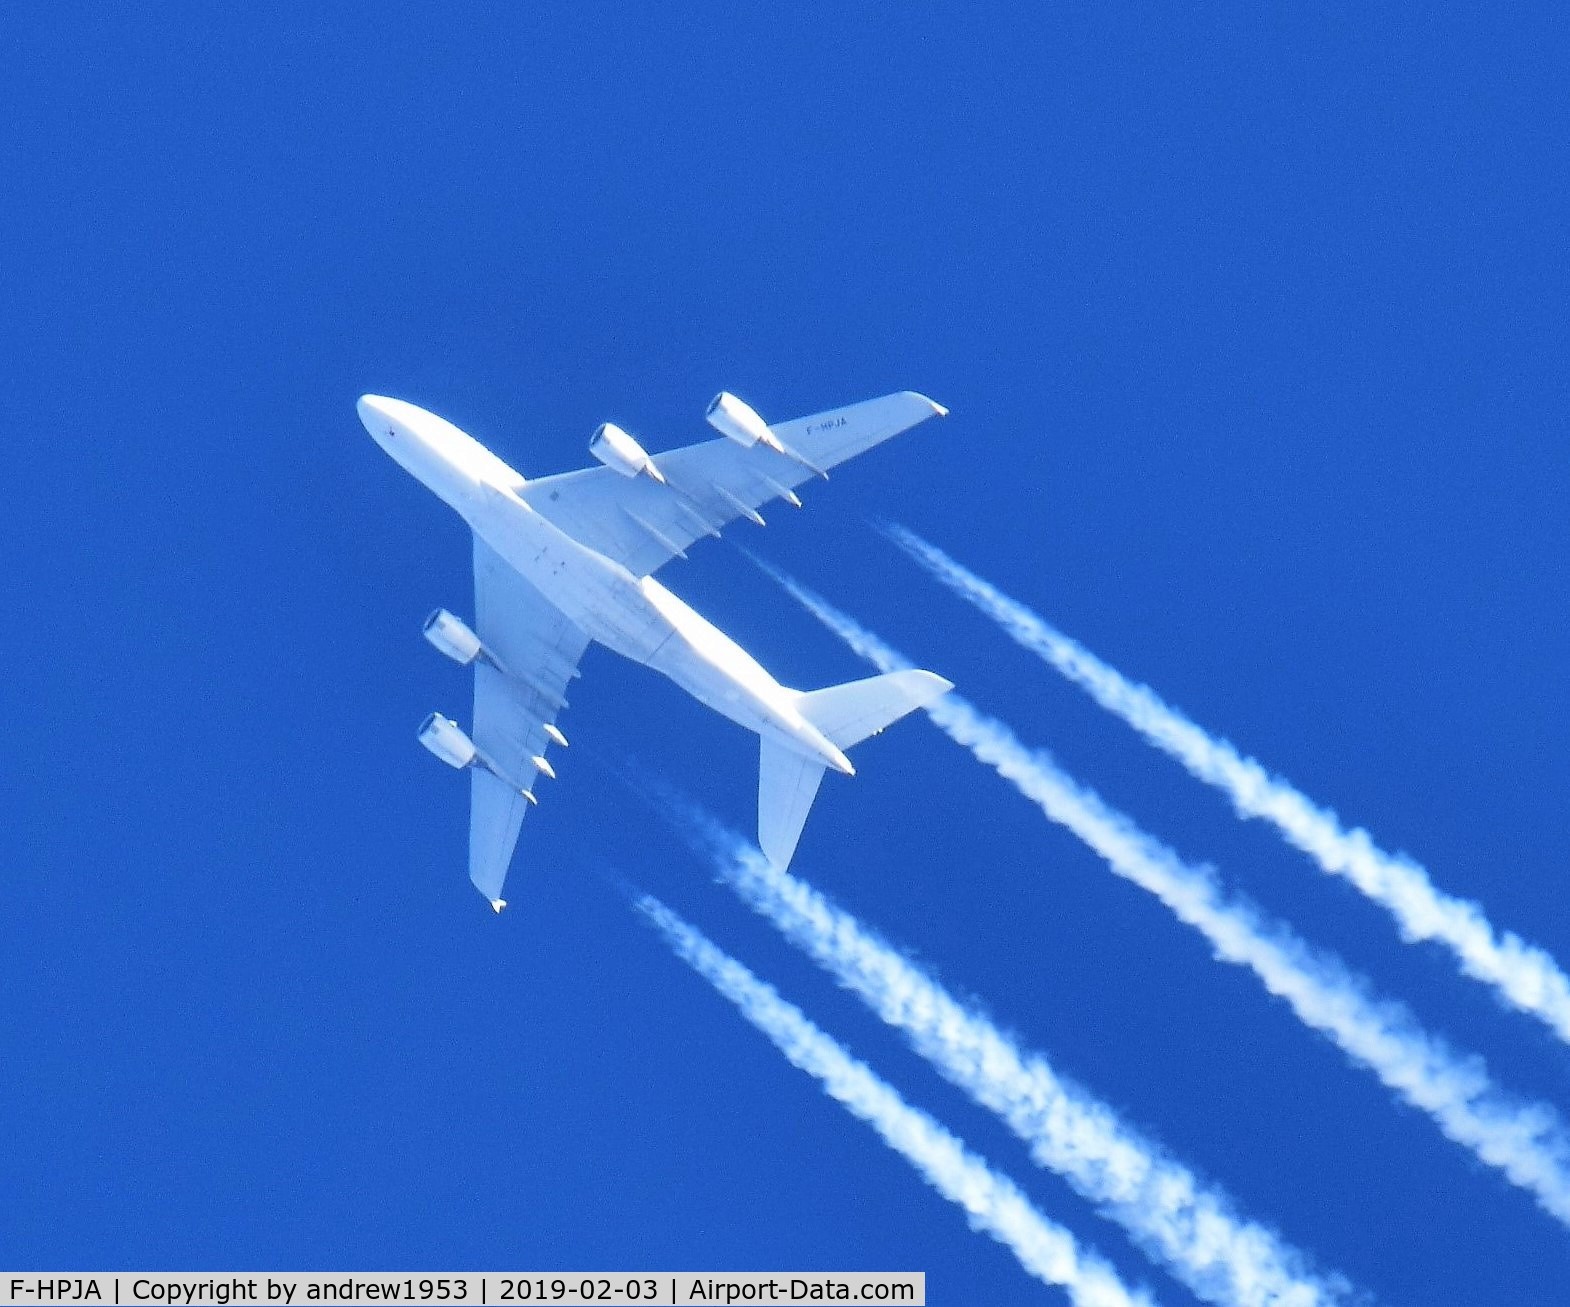 F-HPJA, 2010 Airbus A380-861 C/N 033, F-HPJA over Gloucester.